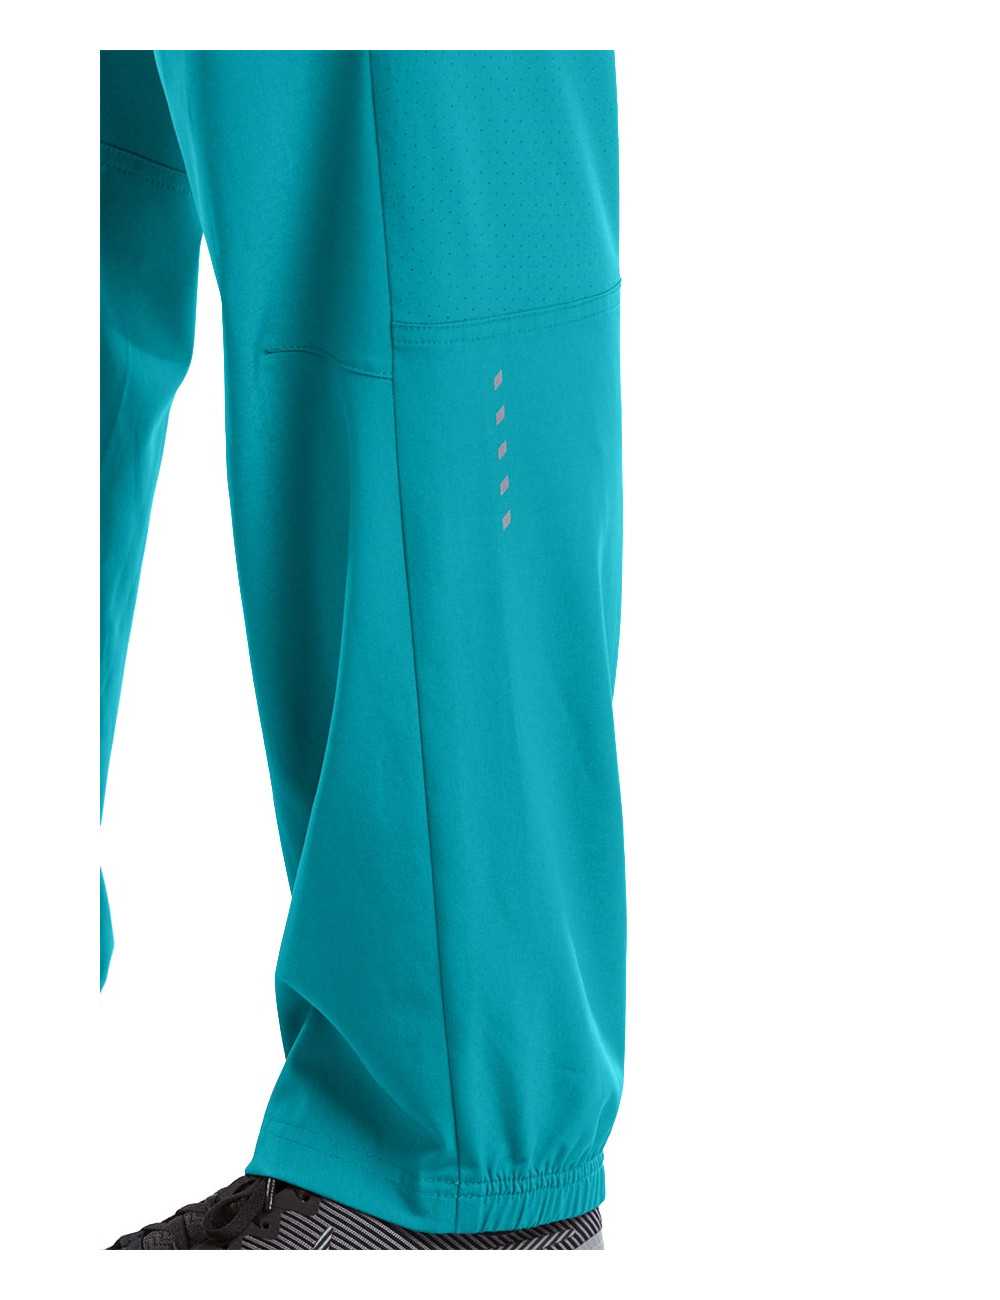 Caballero Barco One Teal